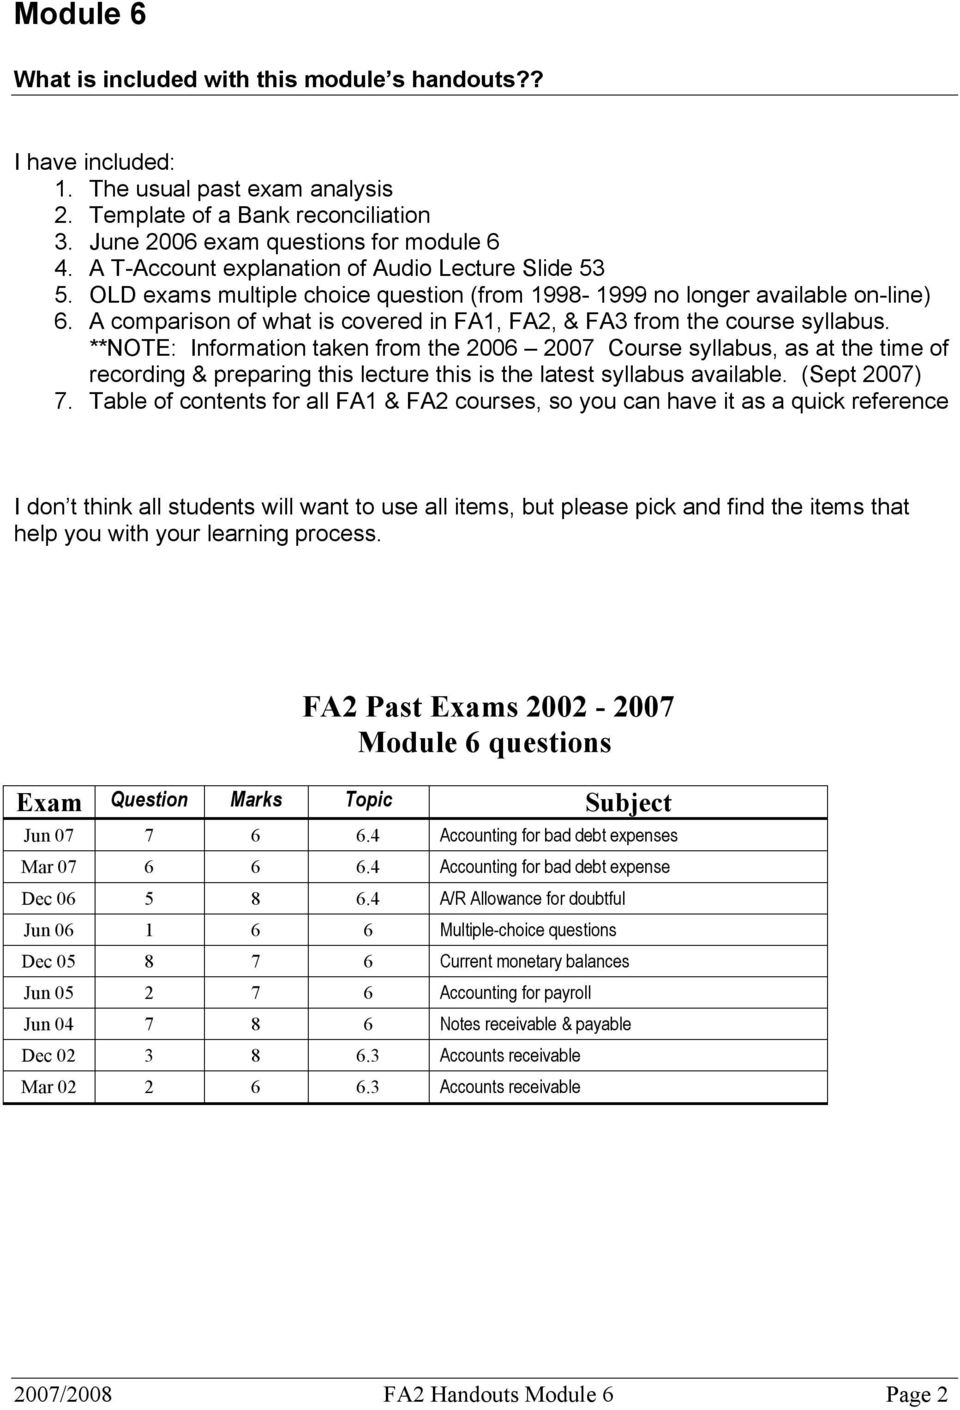 A comparison of what is covered in FA1, FA2, & FA3 from the course syllabus.